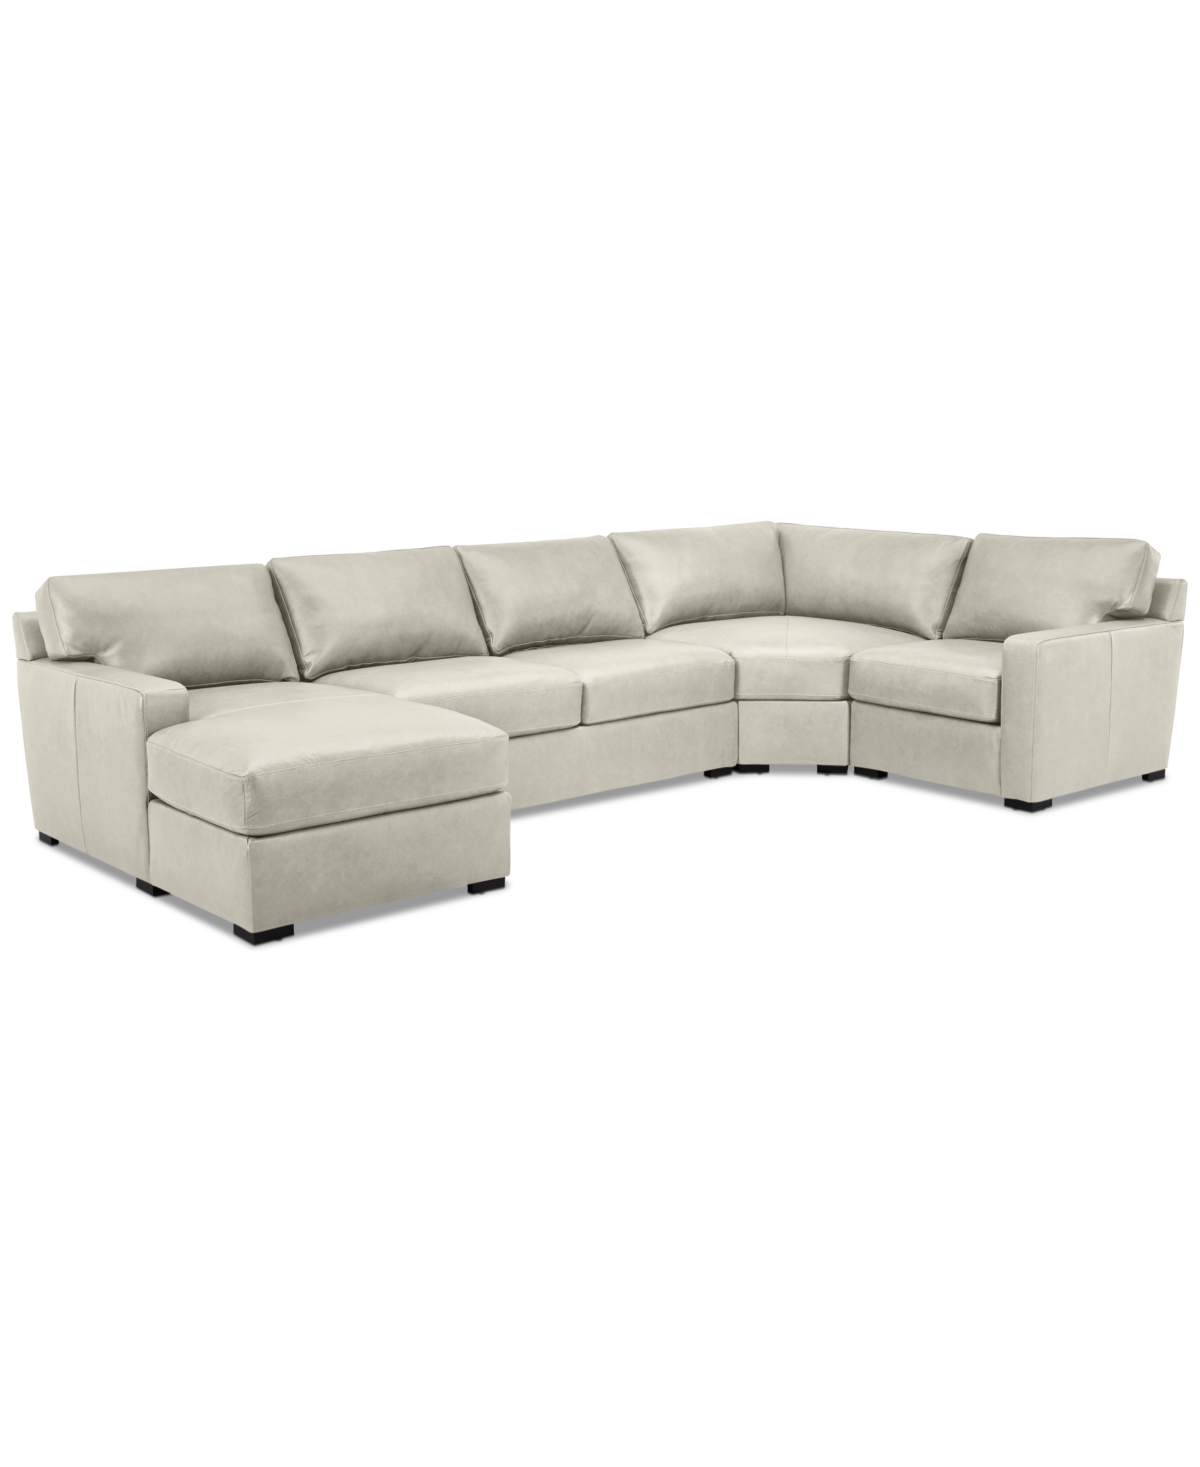 Macy's Radley 148" 4-pc. Leather Wedge Modular Chaise Sectional, Created For  In Coconut Milk